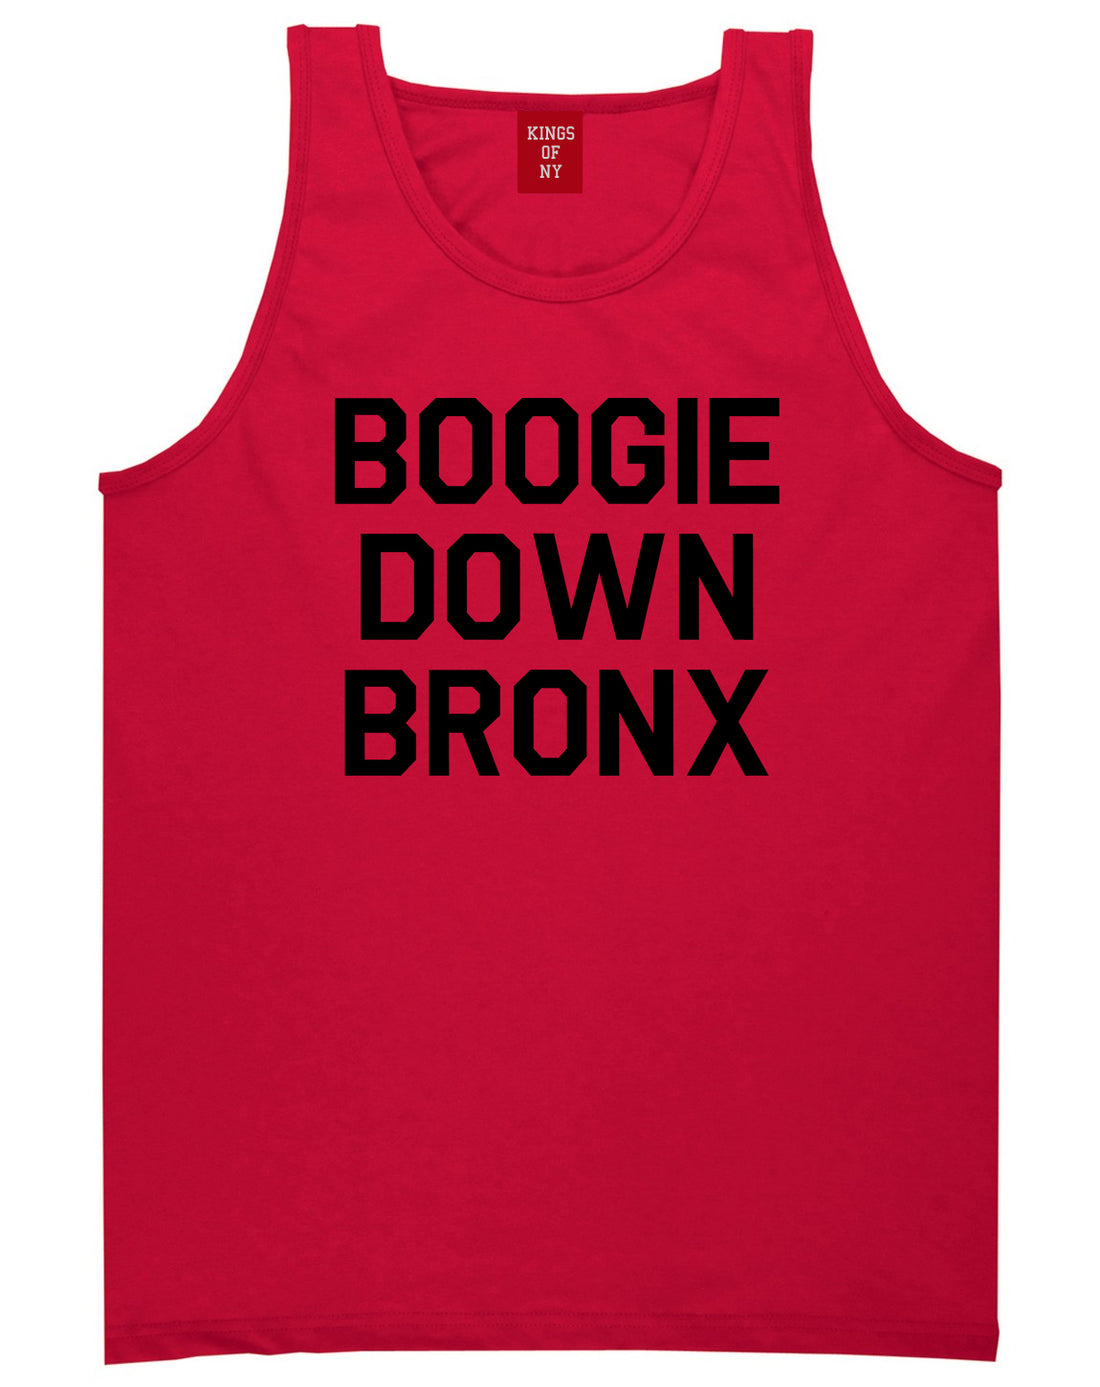 Boogie Down Bronx Mens Tank Top Shirt Red by Kings Of NY